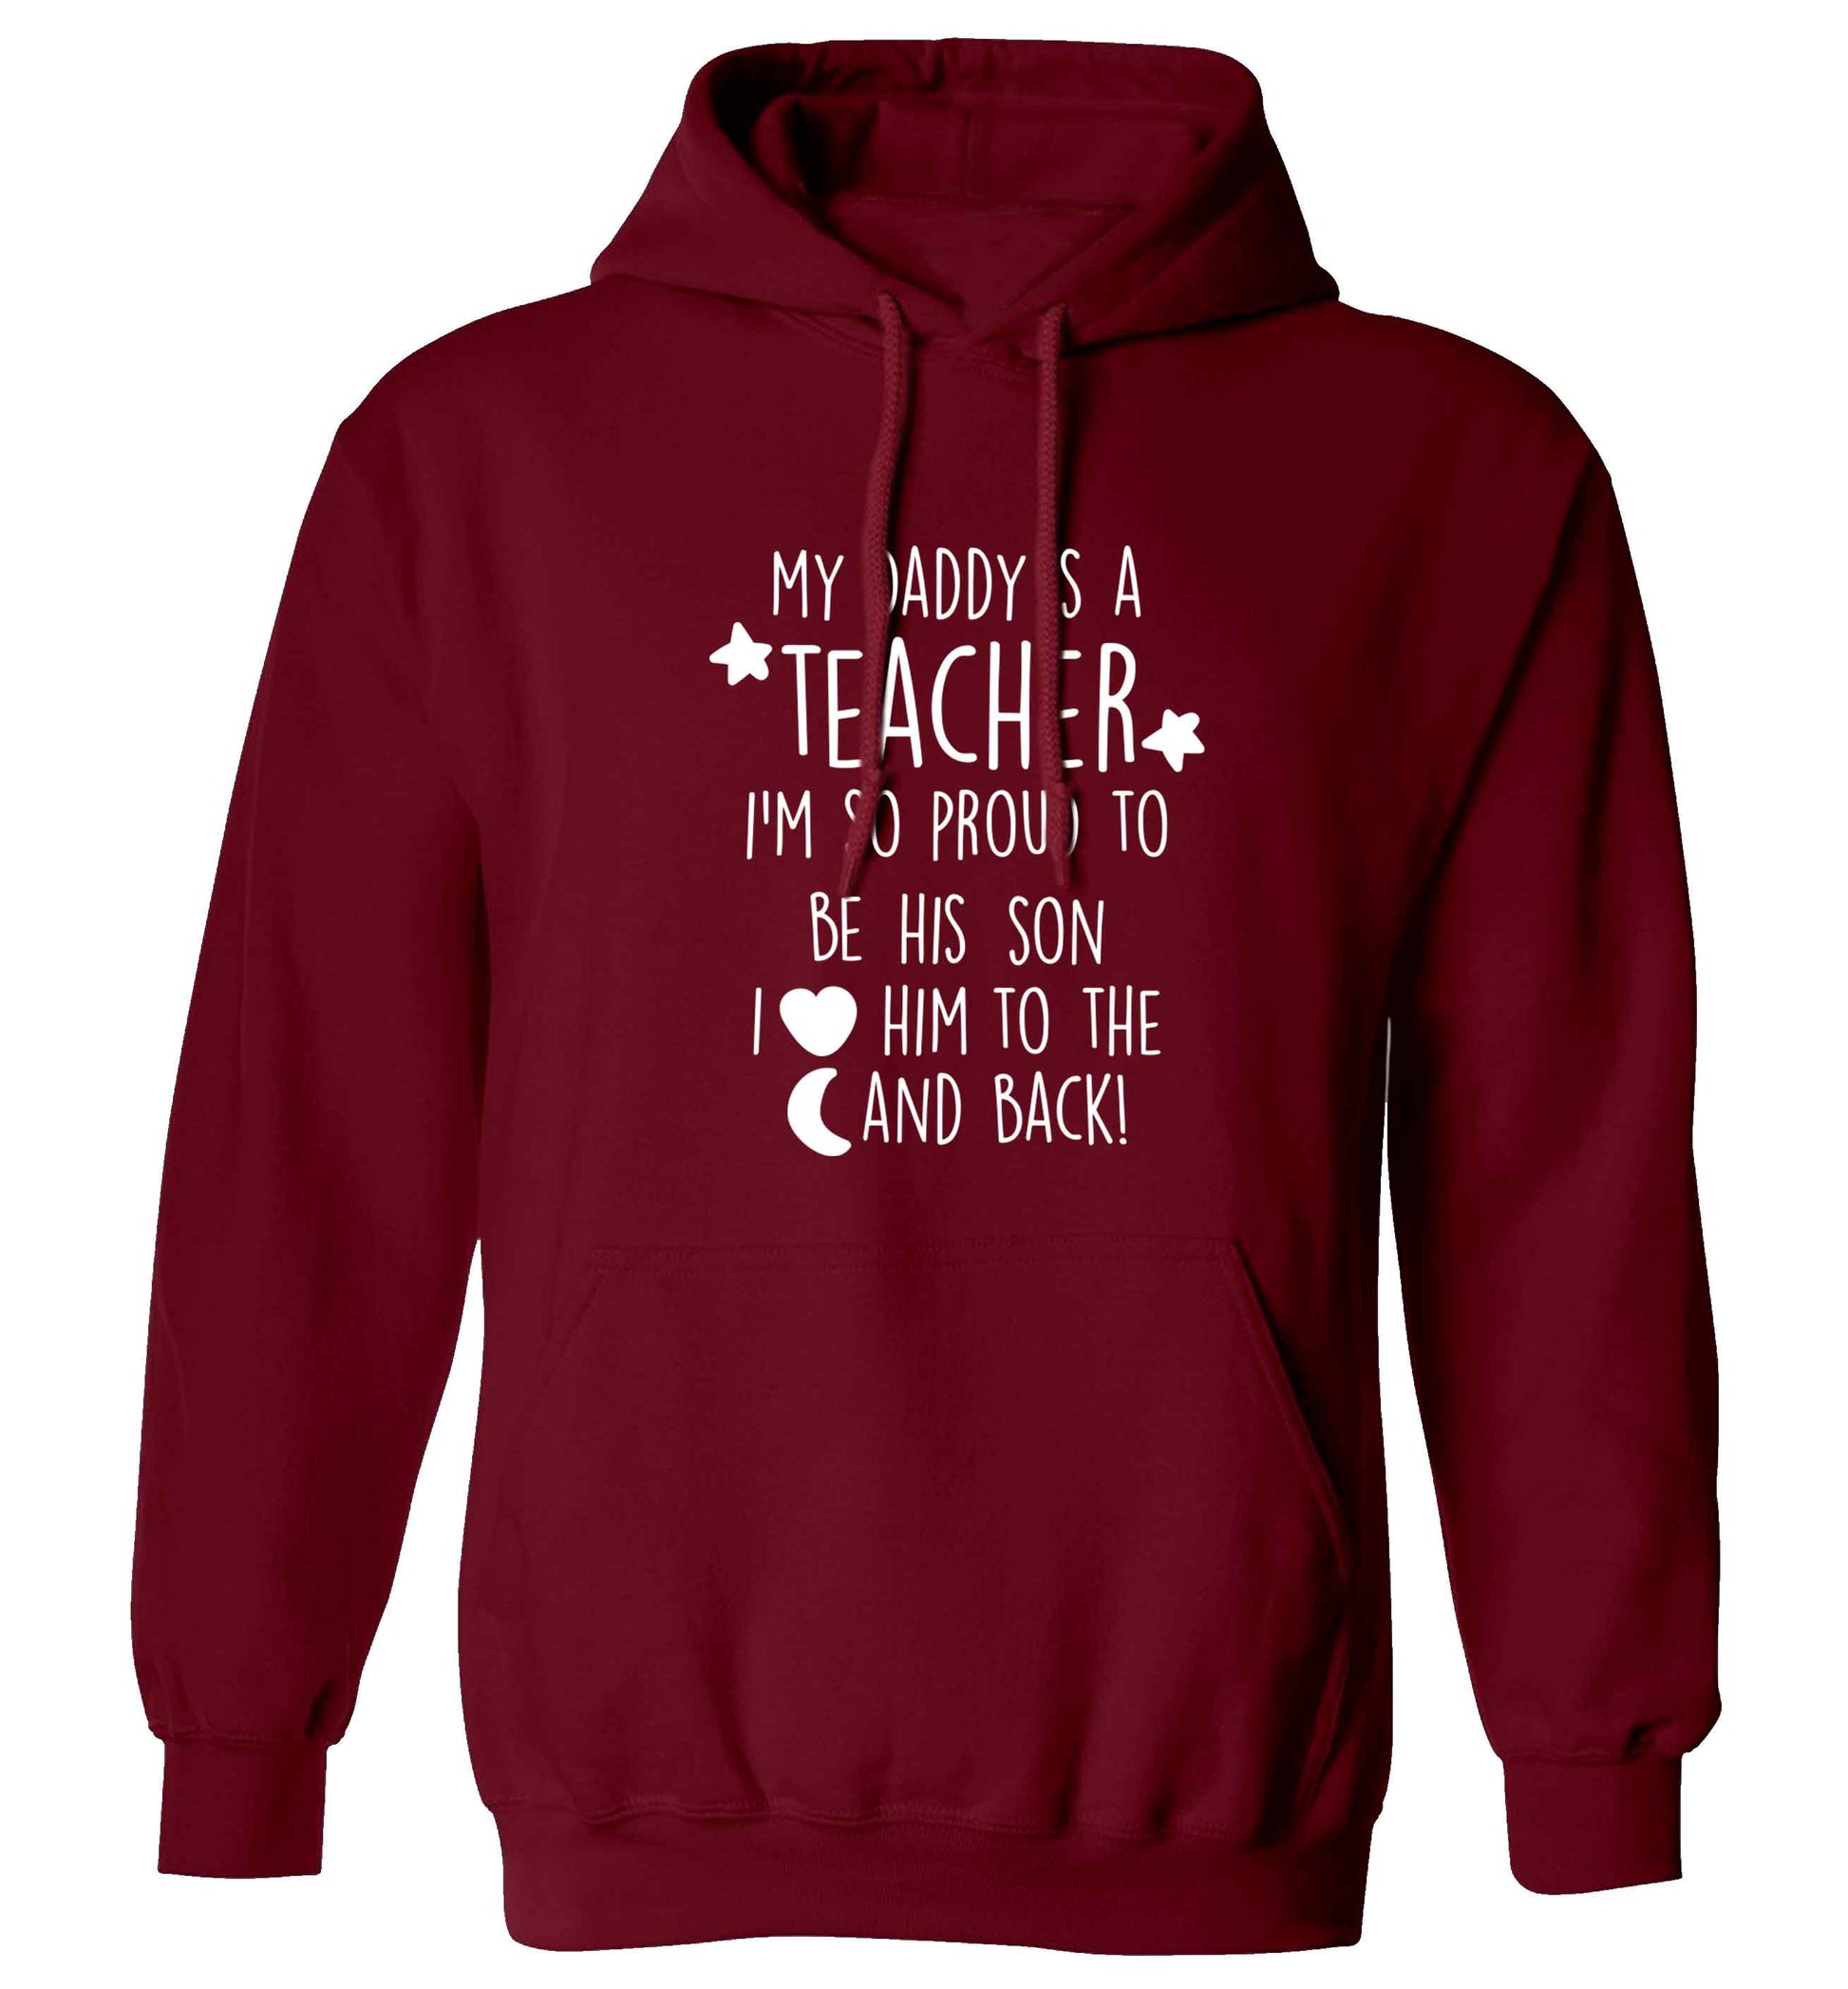 My daddy is a teacher I'm so proud to be his son I love her to the moon and back adults unisex maroon hoodie 2XL